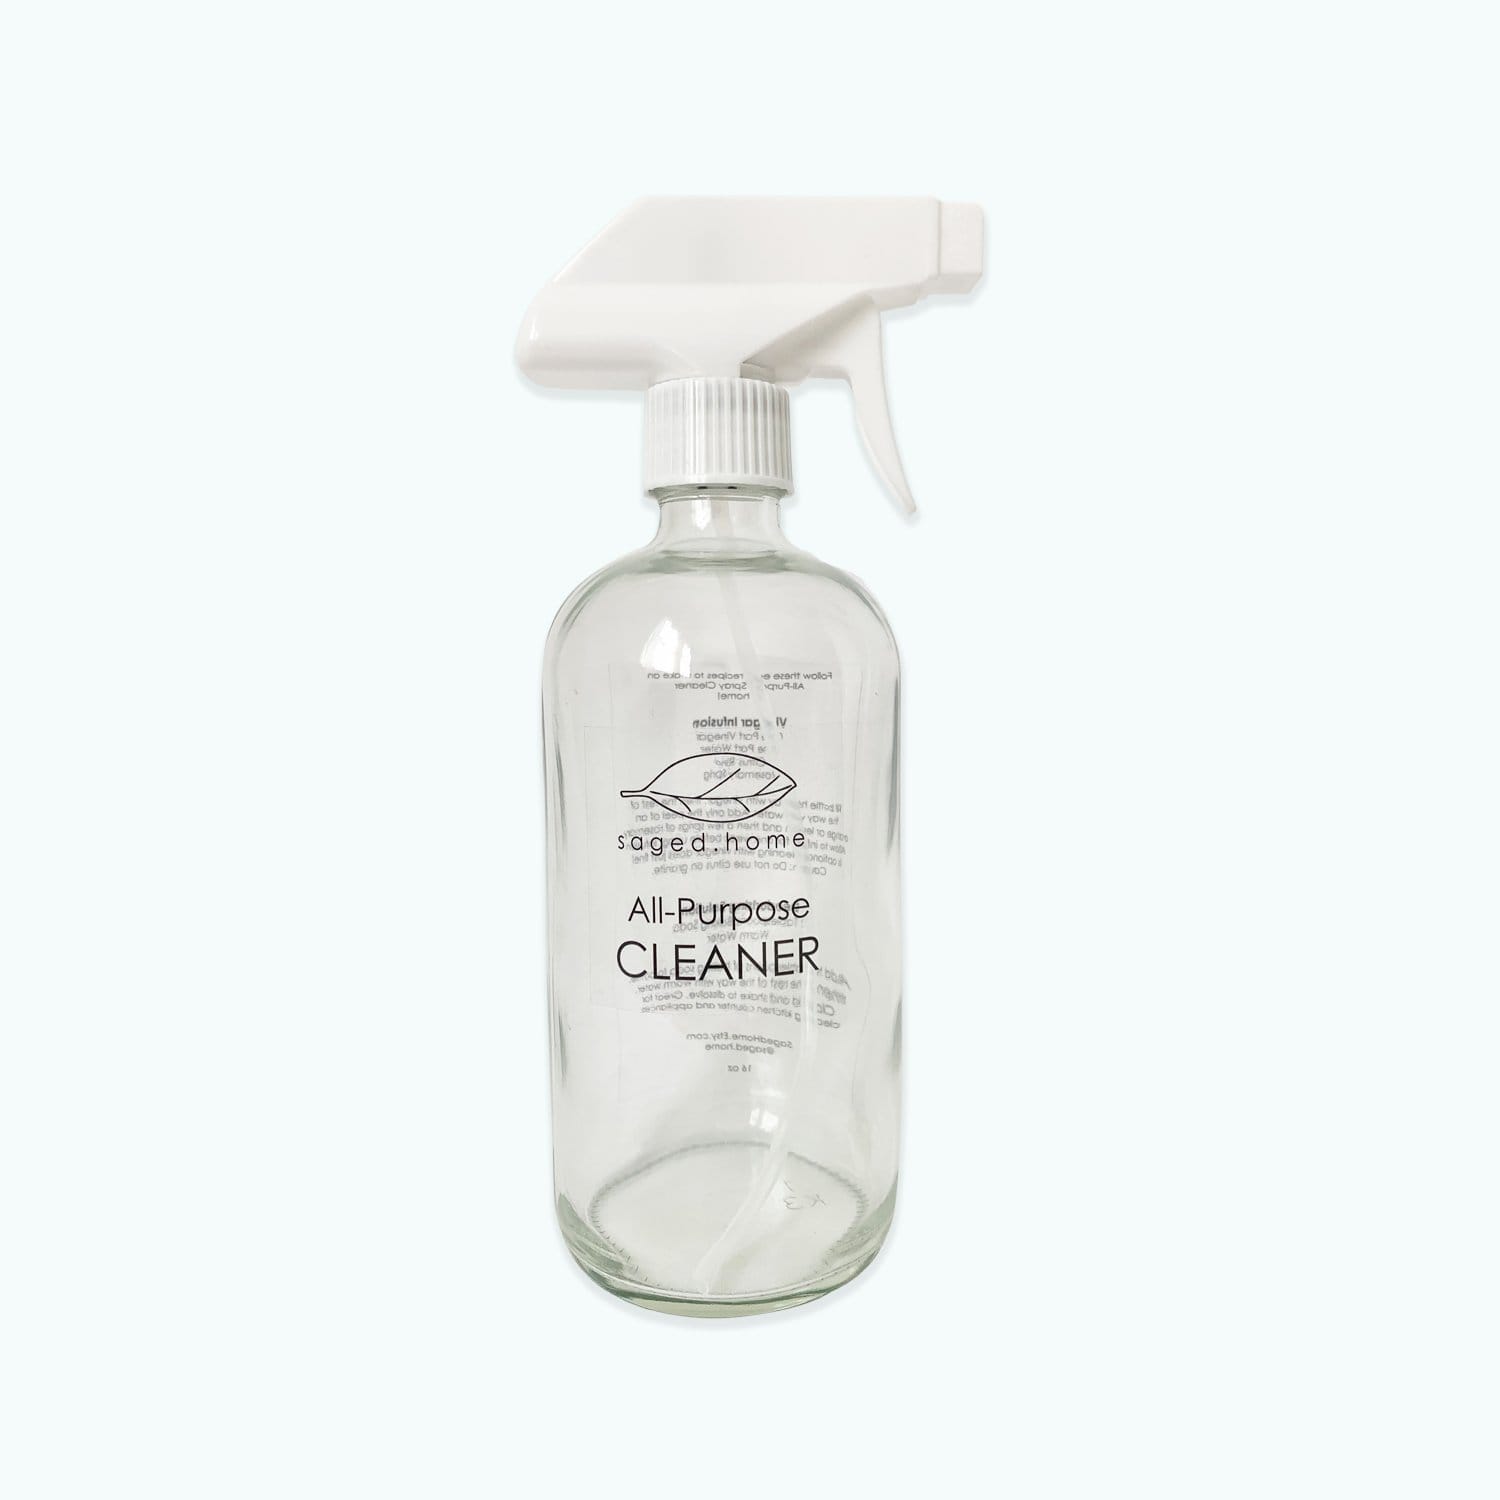 Glass Spray Bottle labeled all purpose cleaner